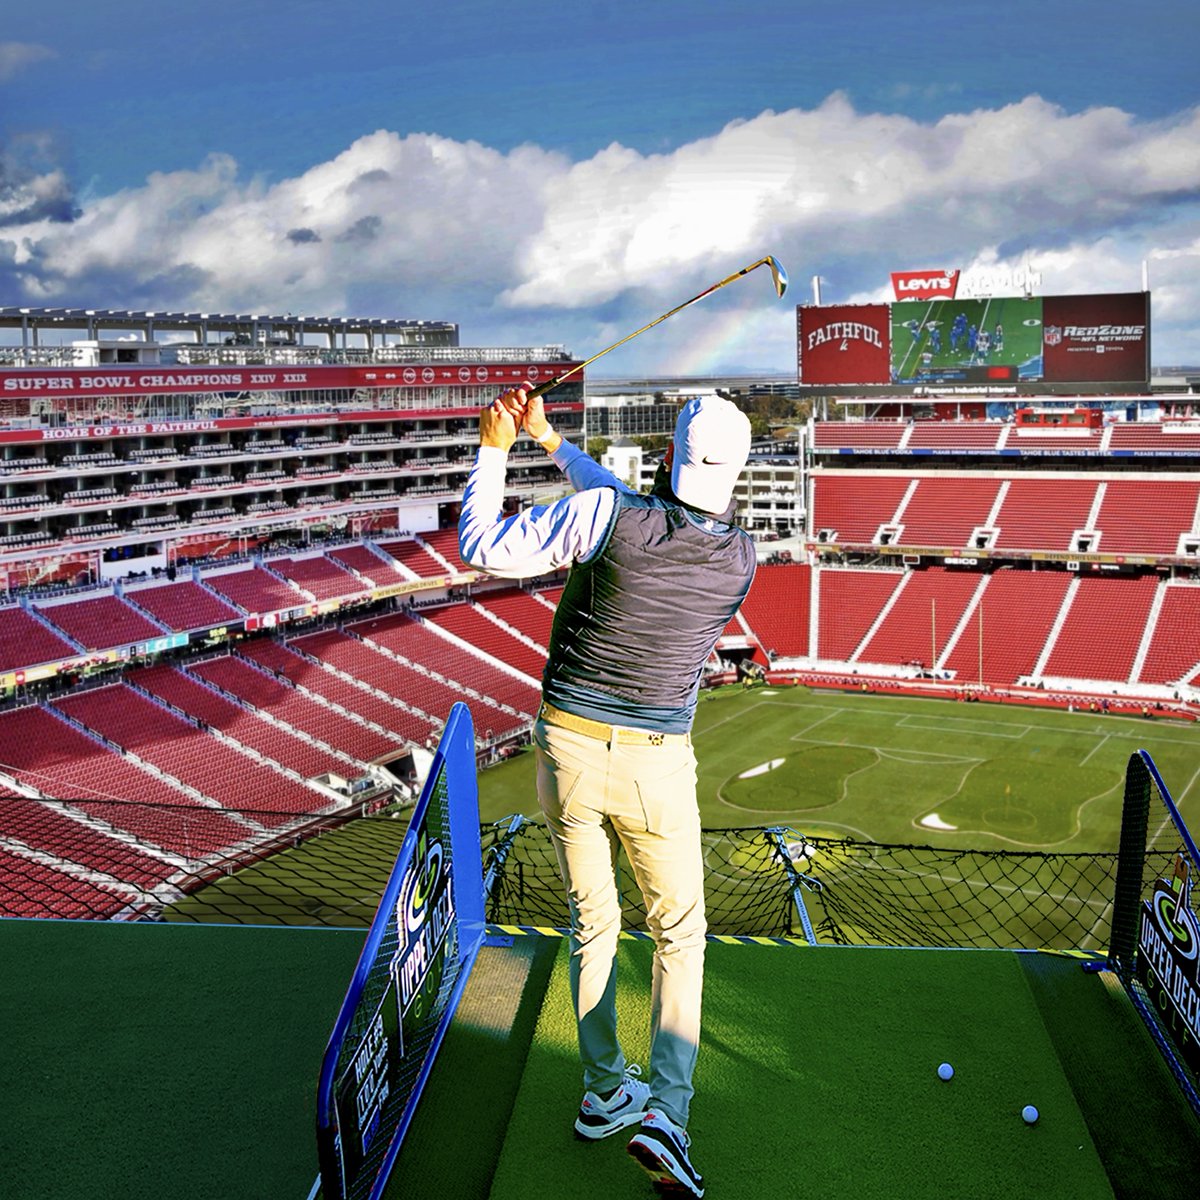 Tee times for @upperdeckgolf are on sale now! Don't miss your chance to play a round of golf inside #LevisStadium April 5-6 ⛳️ Book now: 49rs.co/47CDovl.